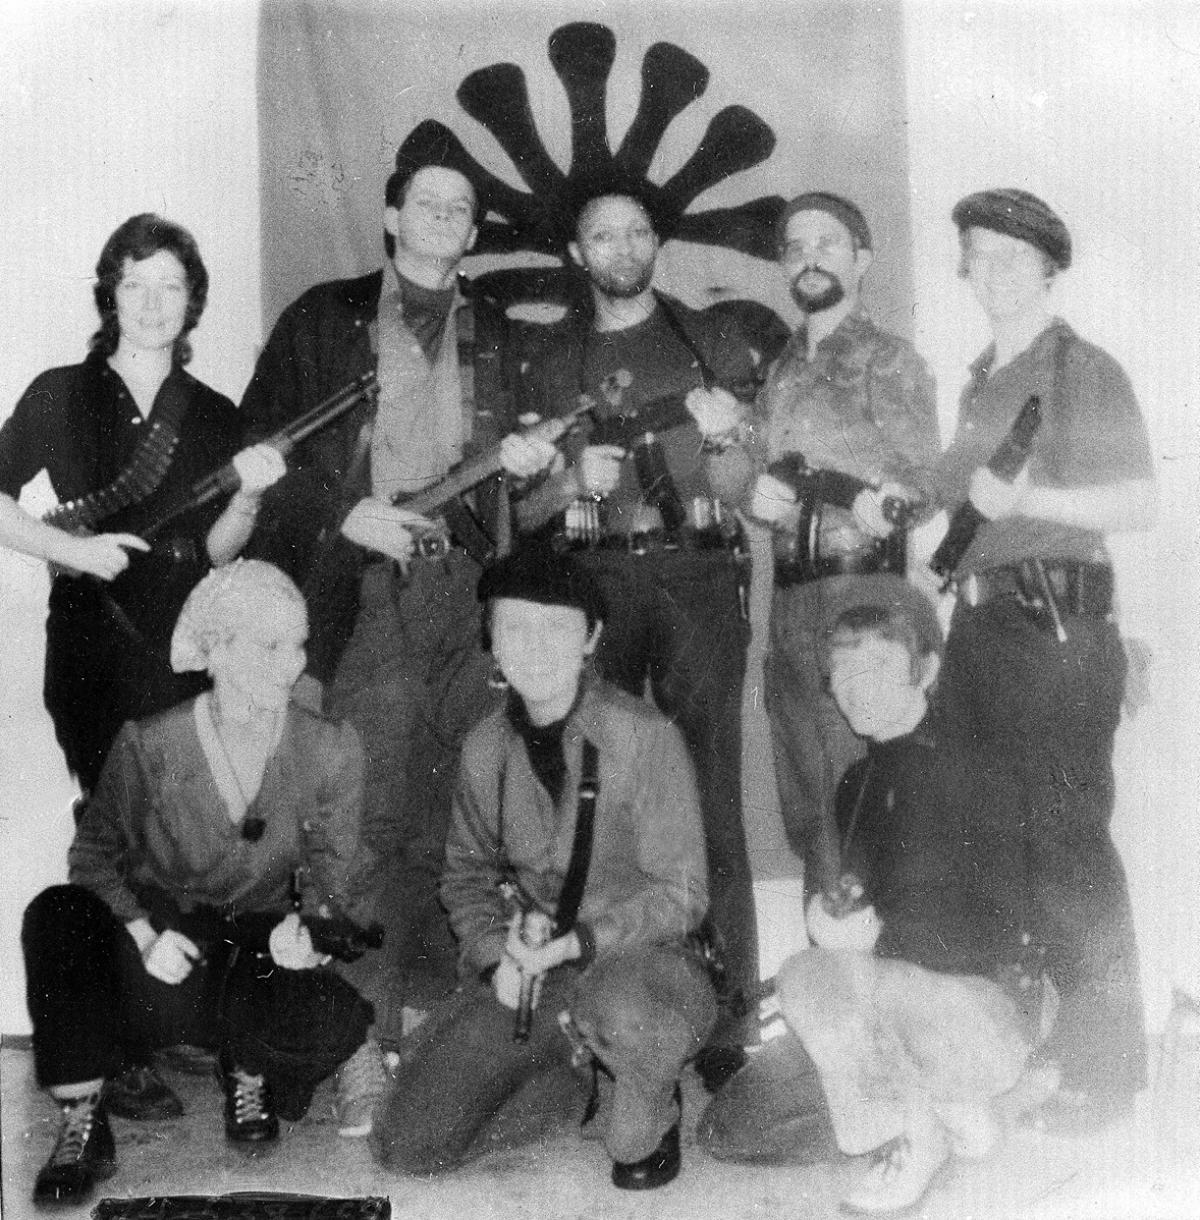 10 bizarre facts about the Symbionese Liberation Army